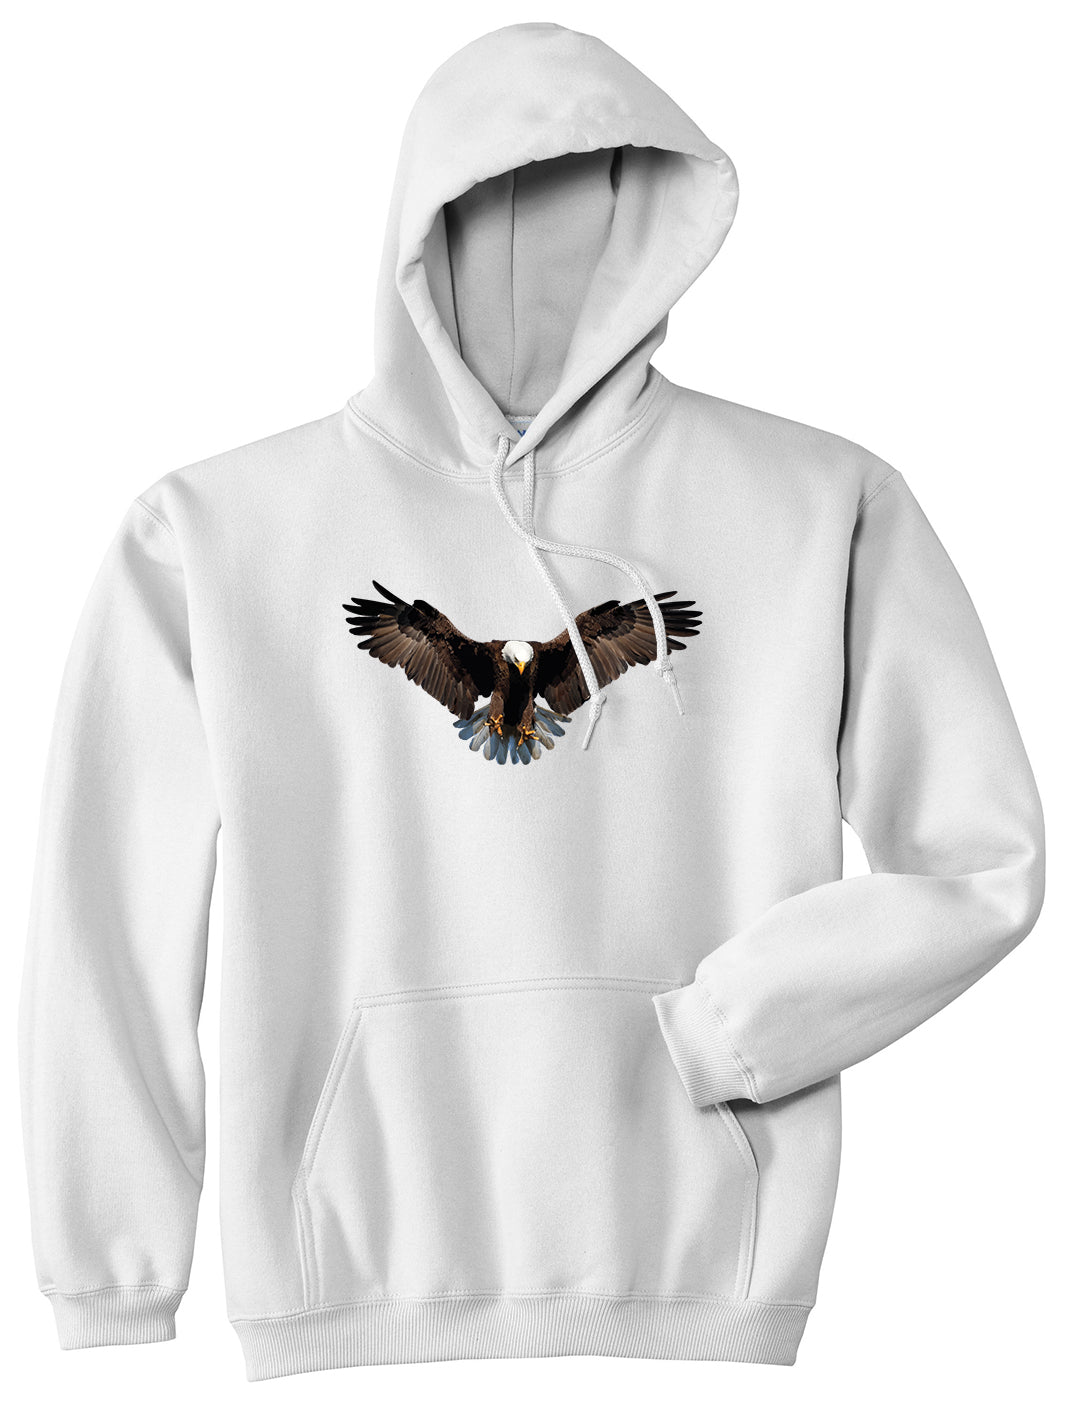 Bald Eagle Wings Spread White Pullover Hoodie by Kings Of NY